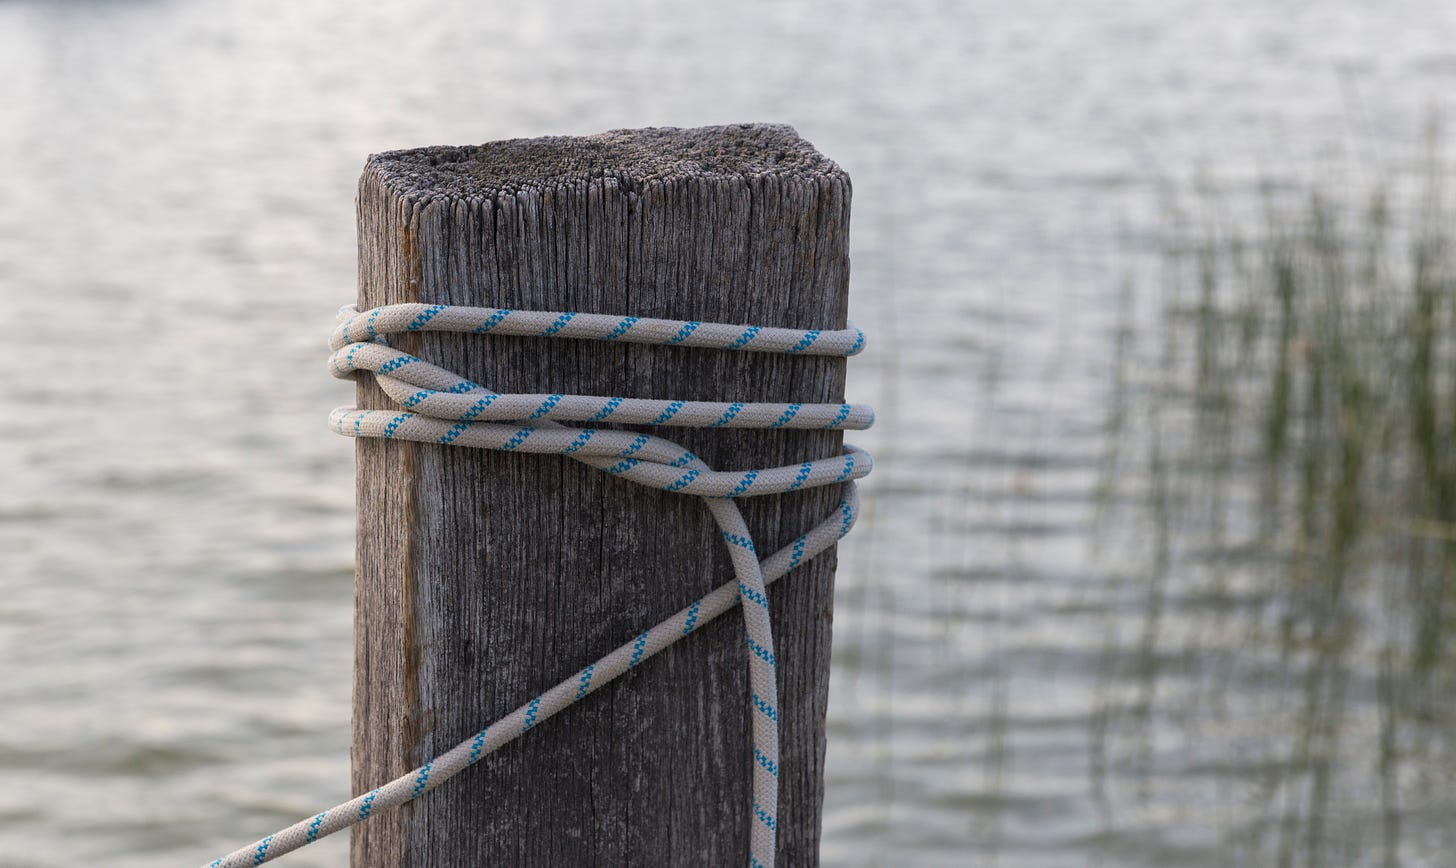 An old wood dock post with a blue-lined rope wrapped around it about 4 times, tied loosely, with some reeds and gently rippling water in the background